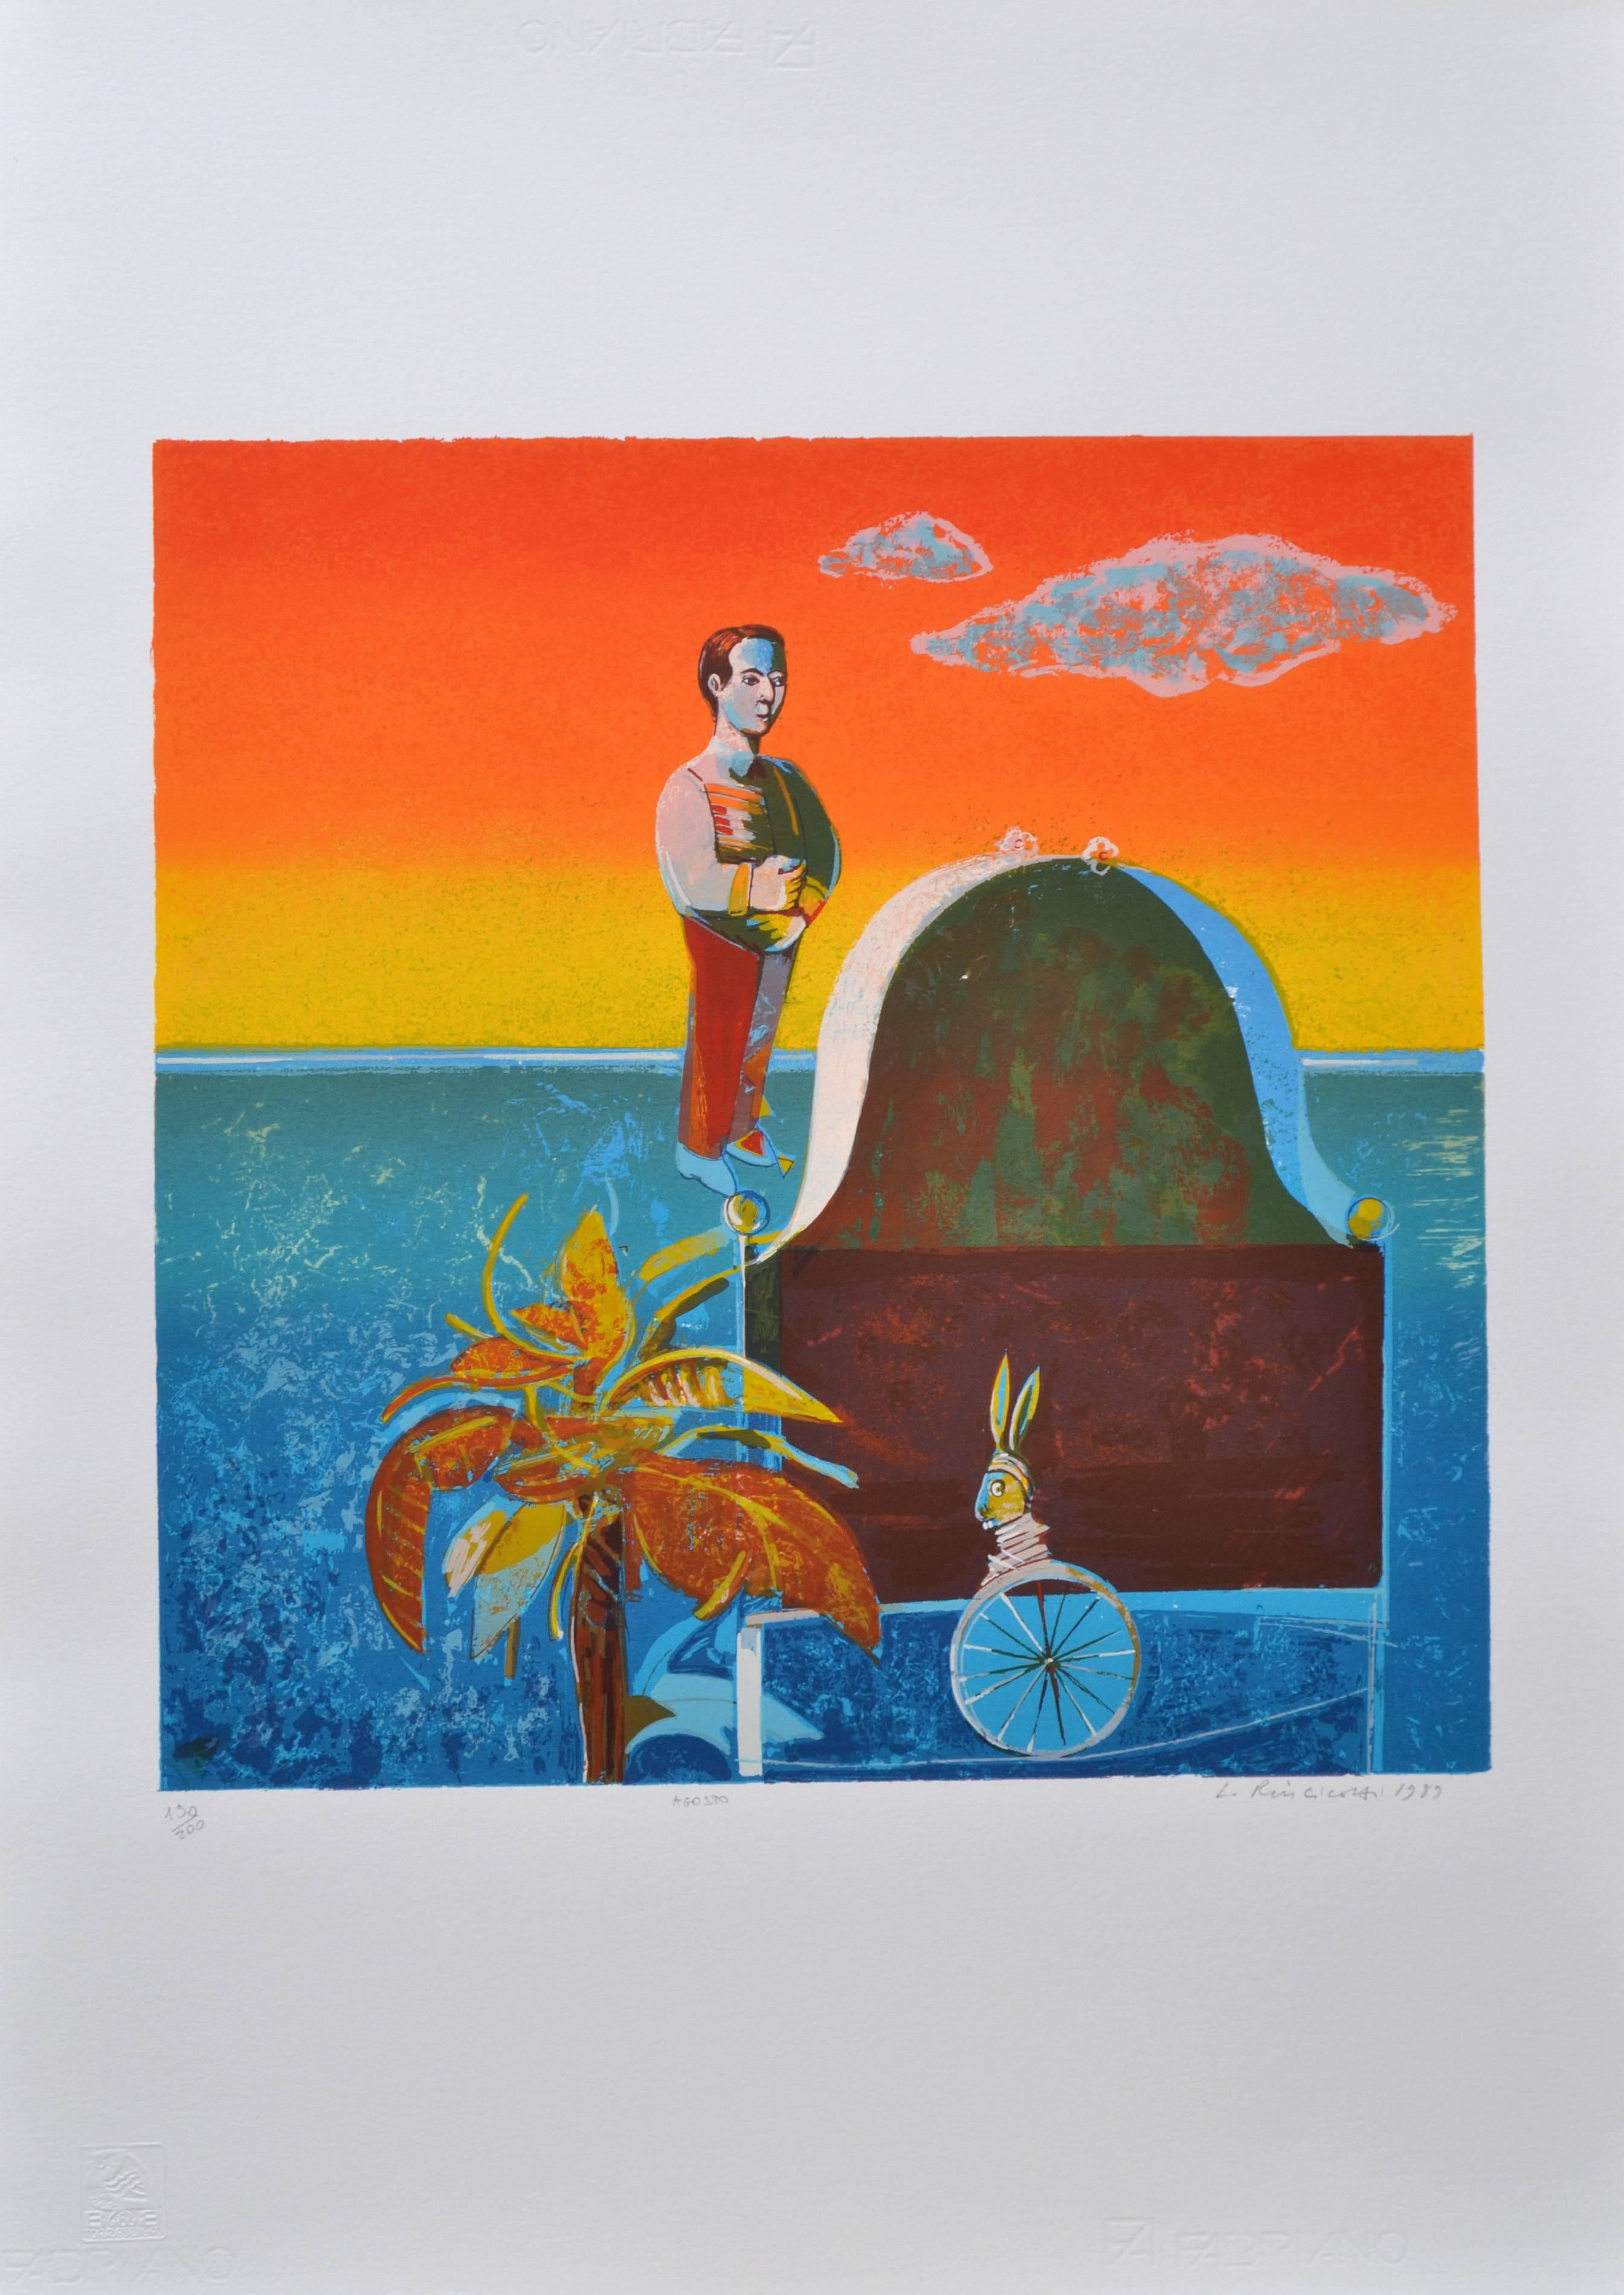 Luigi Rincicotti, a surrealist painter, was born in Fano, Italy and his artworks have been featured in over 200 exhibitions and museums both in his home country Italy and in other parts of the world. This is a high quality lithograph of one of his